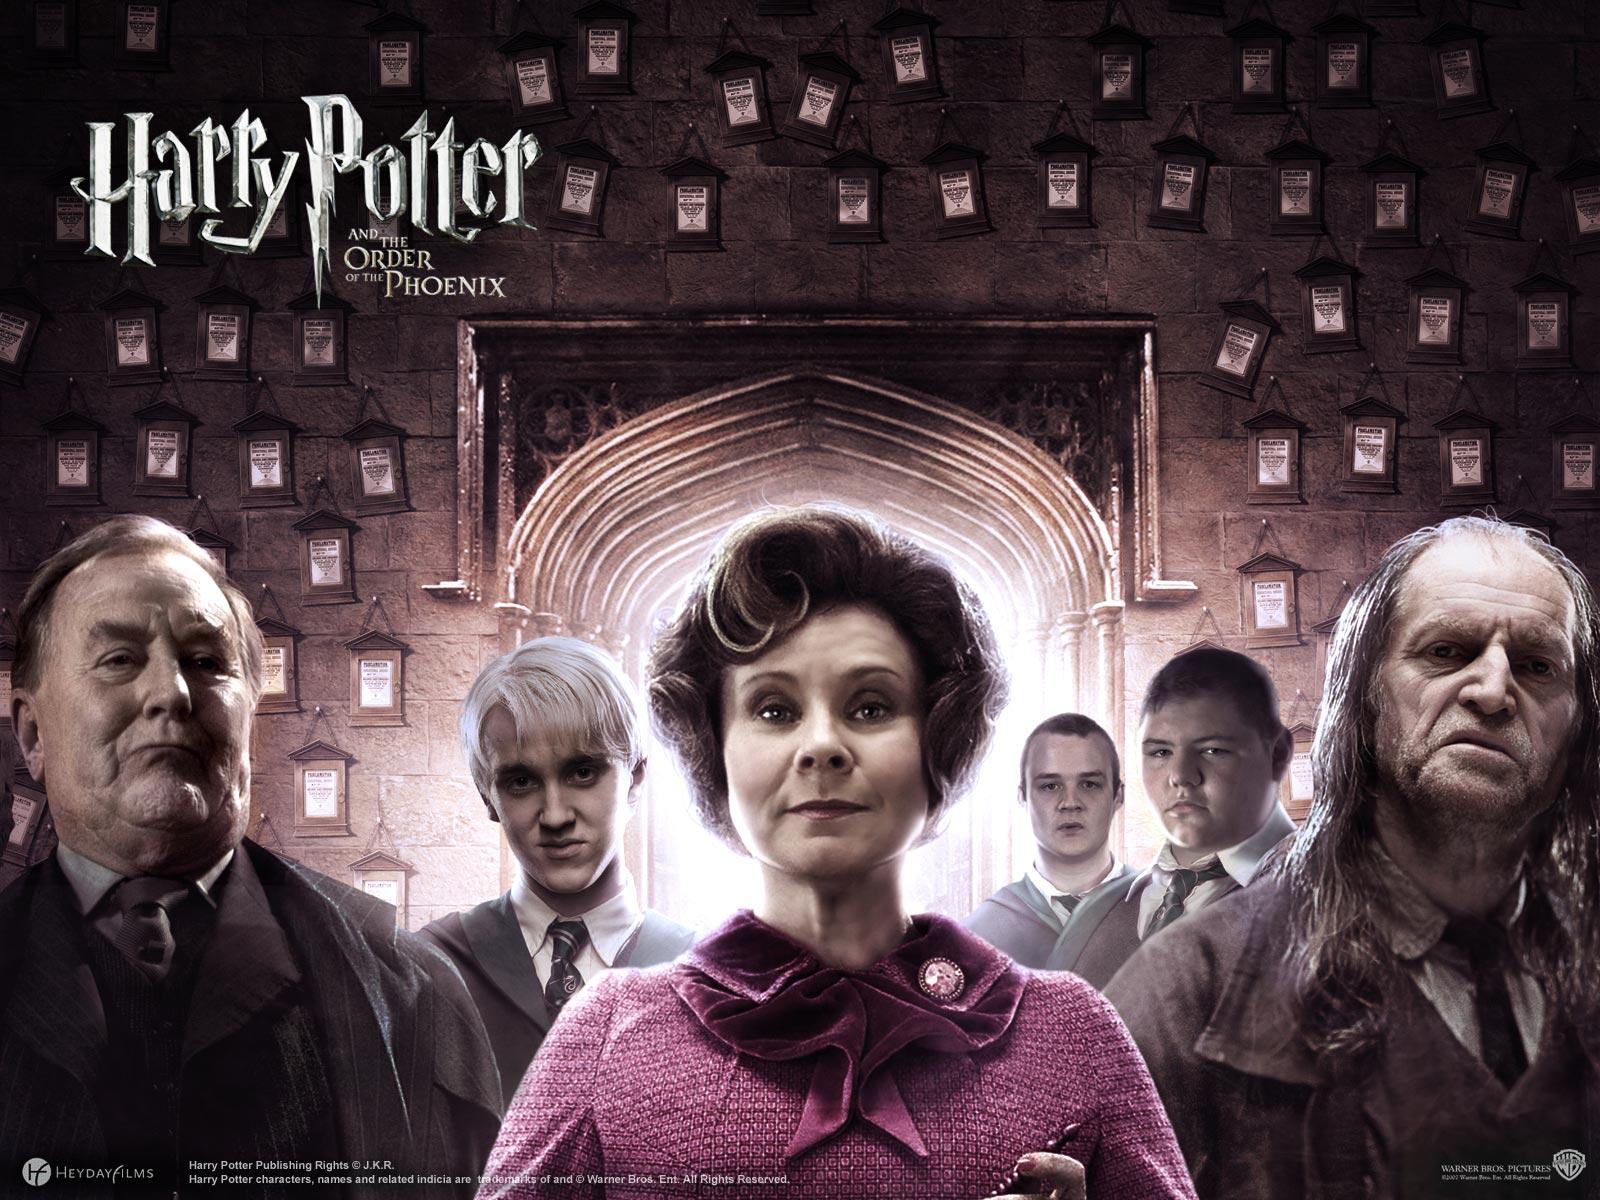 Harry Potter and Order of Phoenix wallpapers and images - wallpapers, pictures, photos1600 x 1200